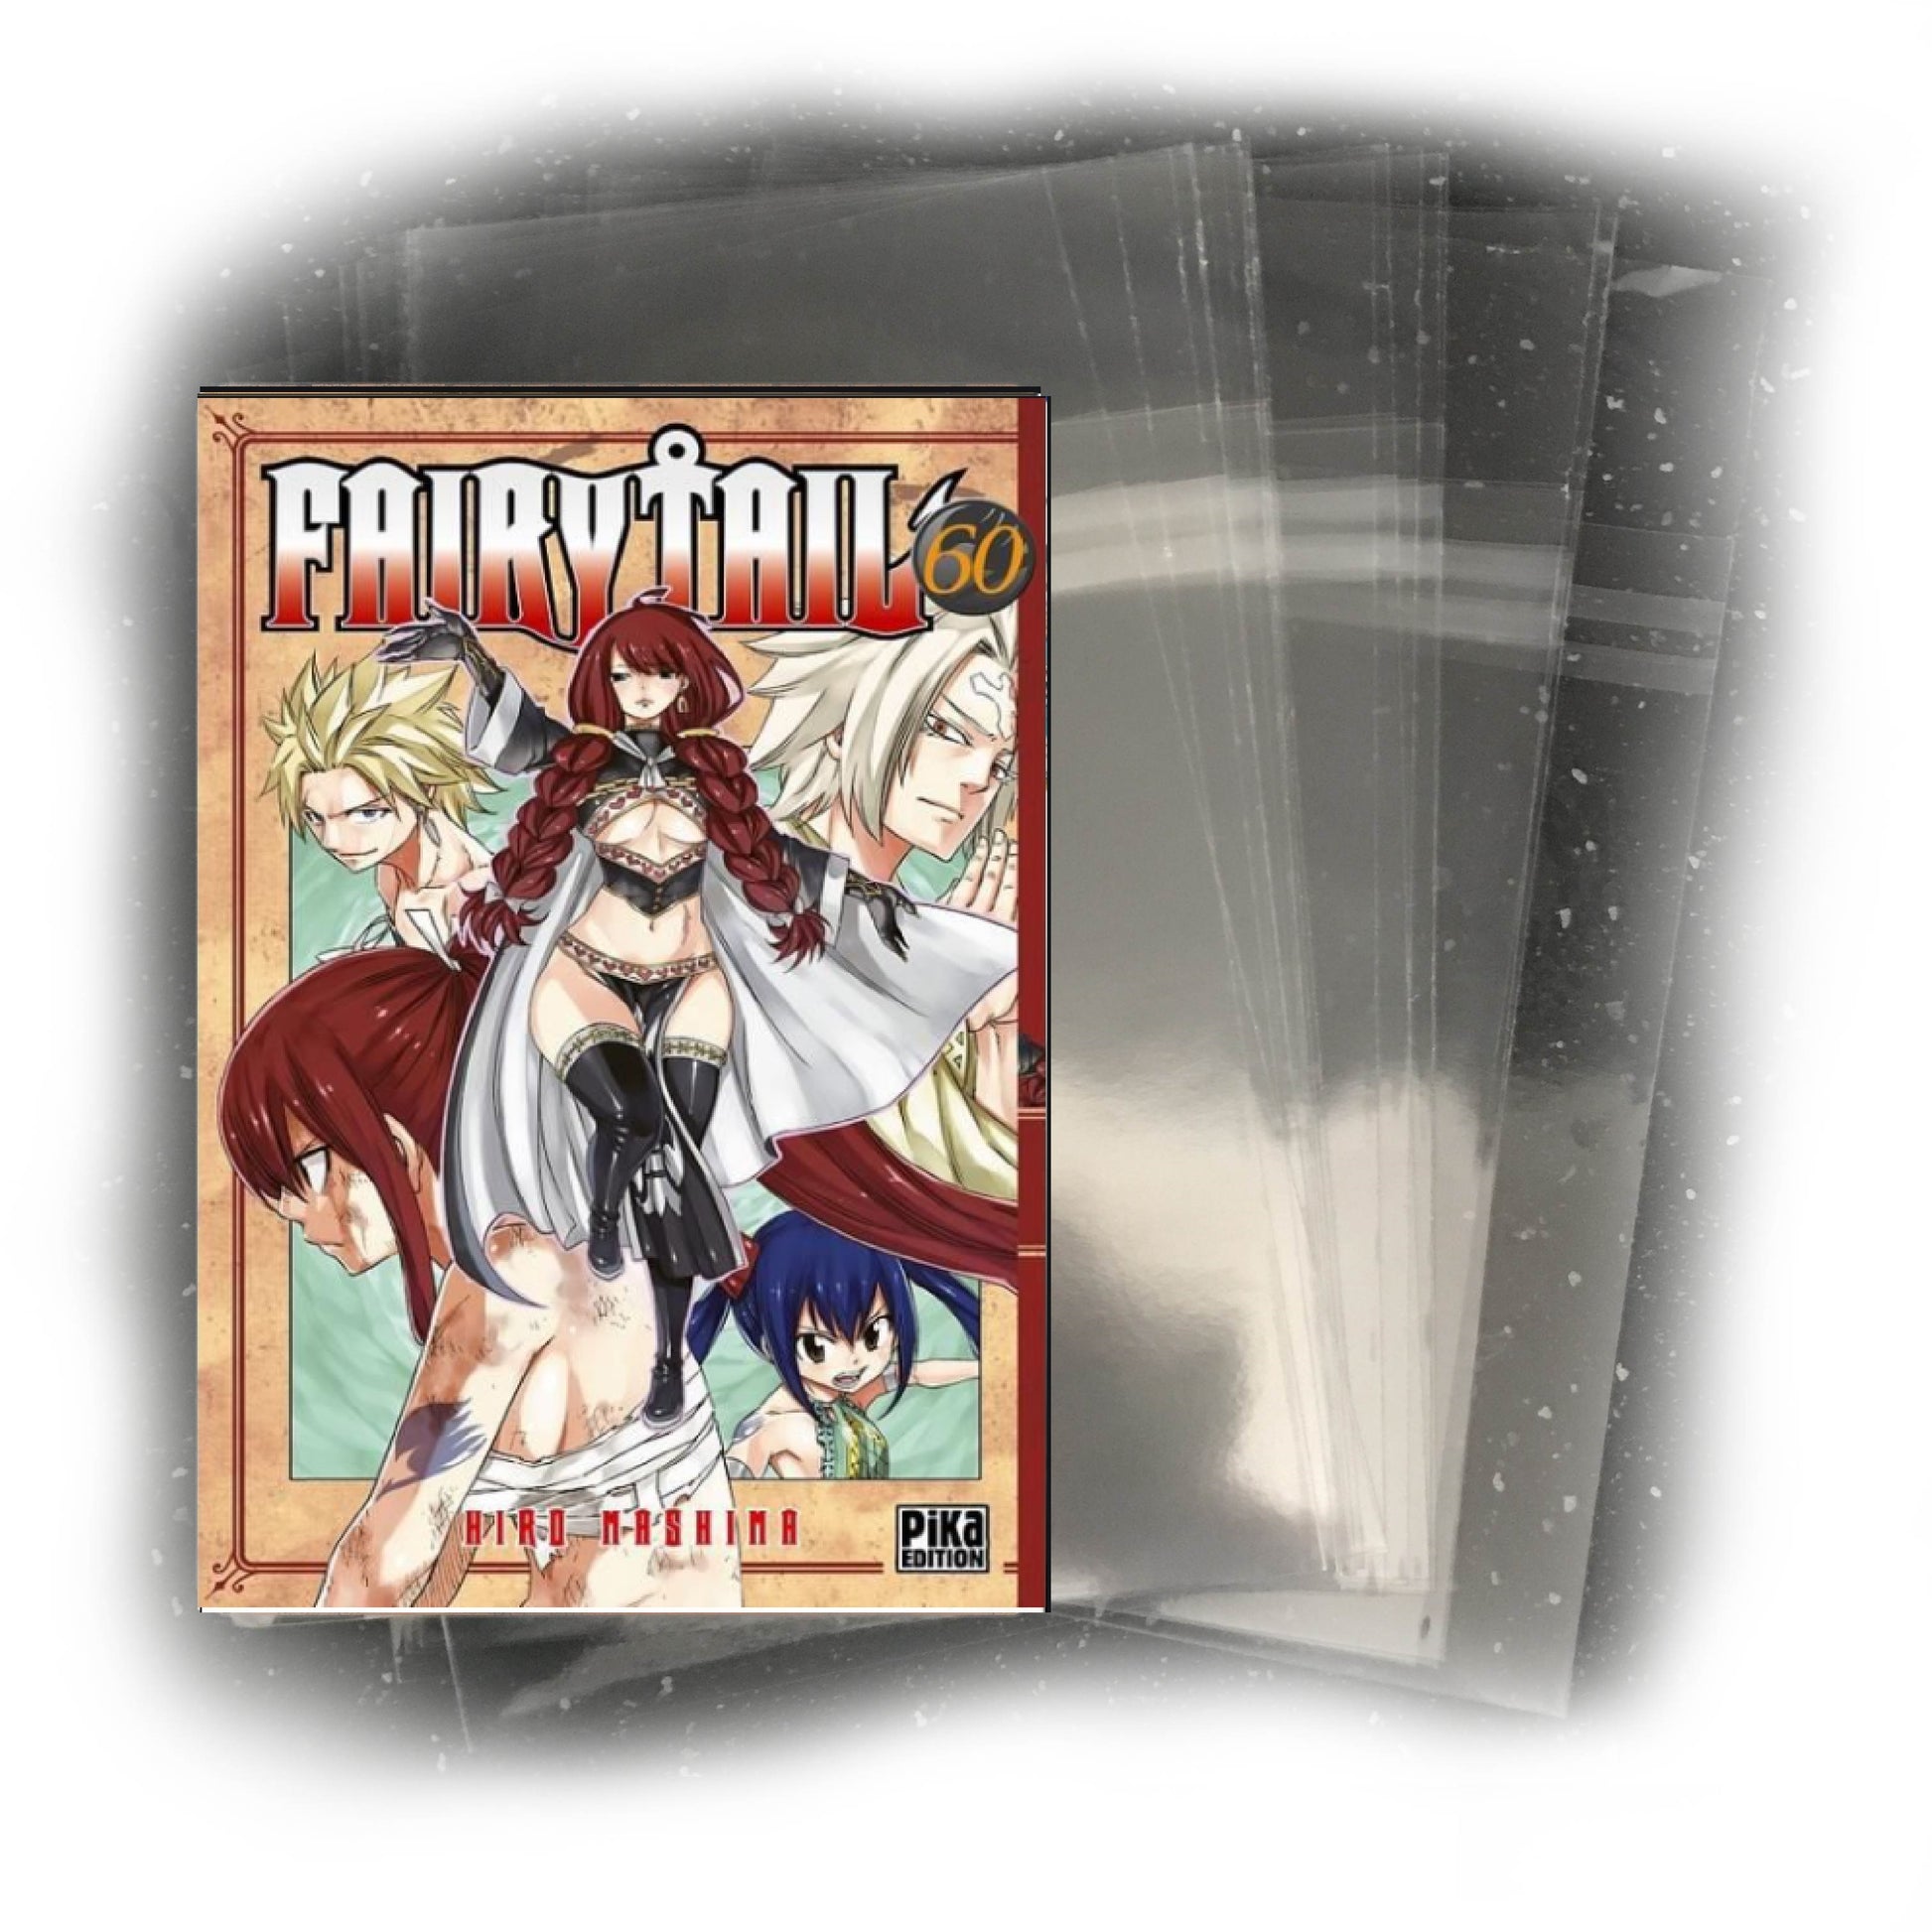 Bustine protettive WR formato Manga 2 - Pacco 10 – Collectifyshop